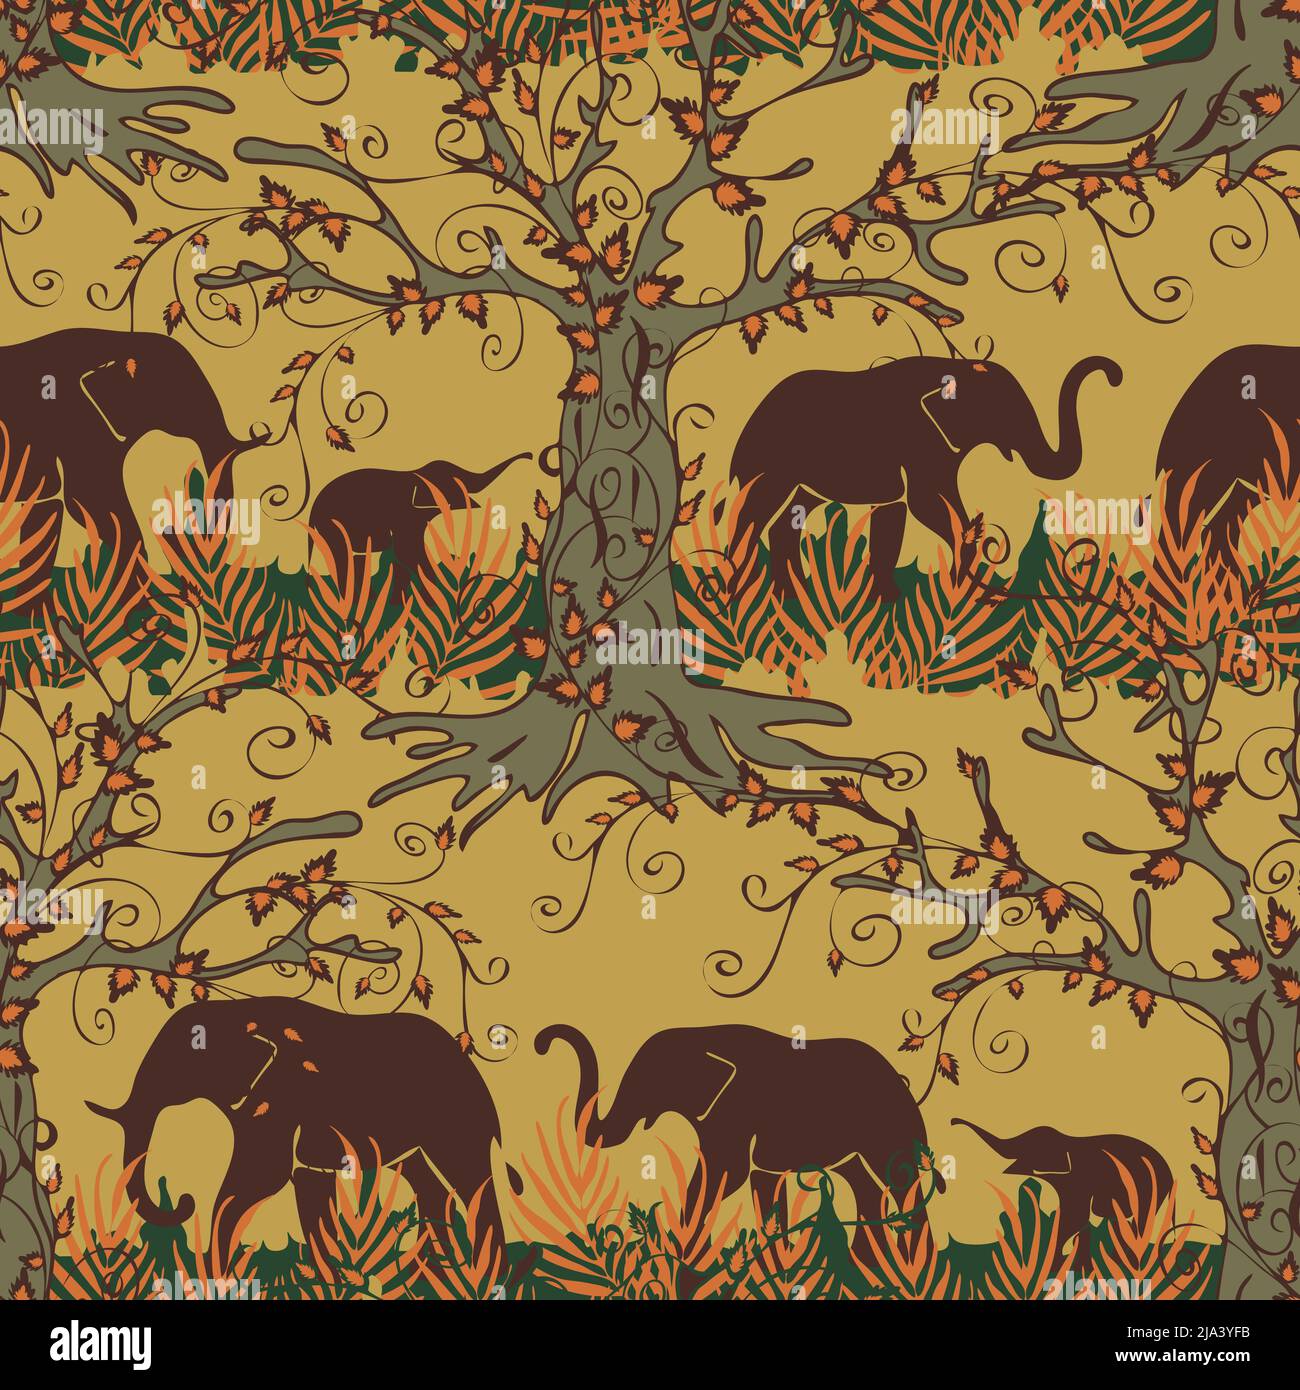 Seamless vector pattern with elephant silhouettes on beige background. African animal landscape wallpaper design. Tropical forest fashion textile. Stock Vector